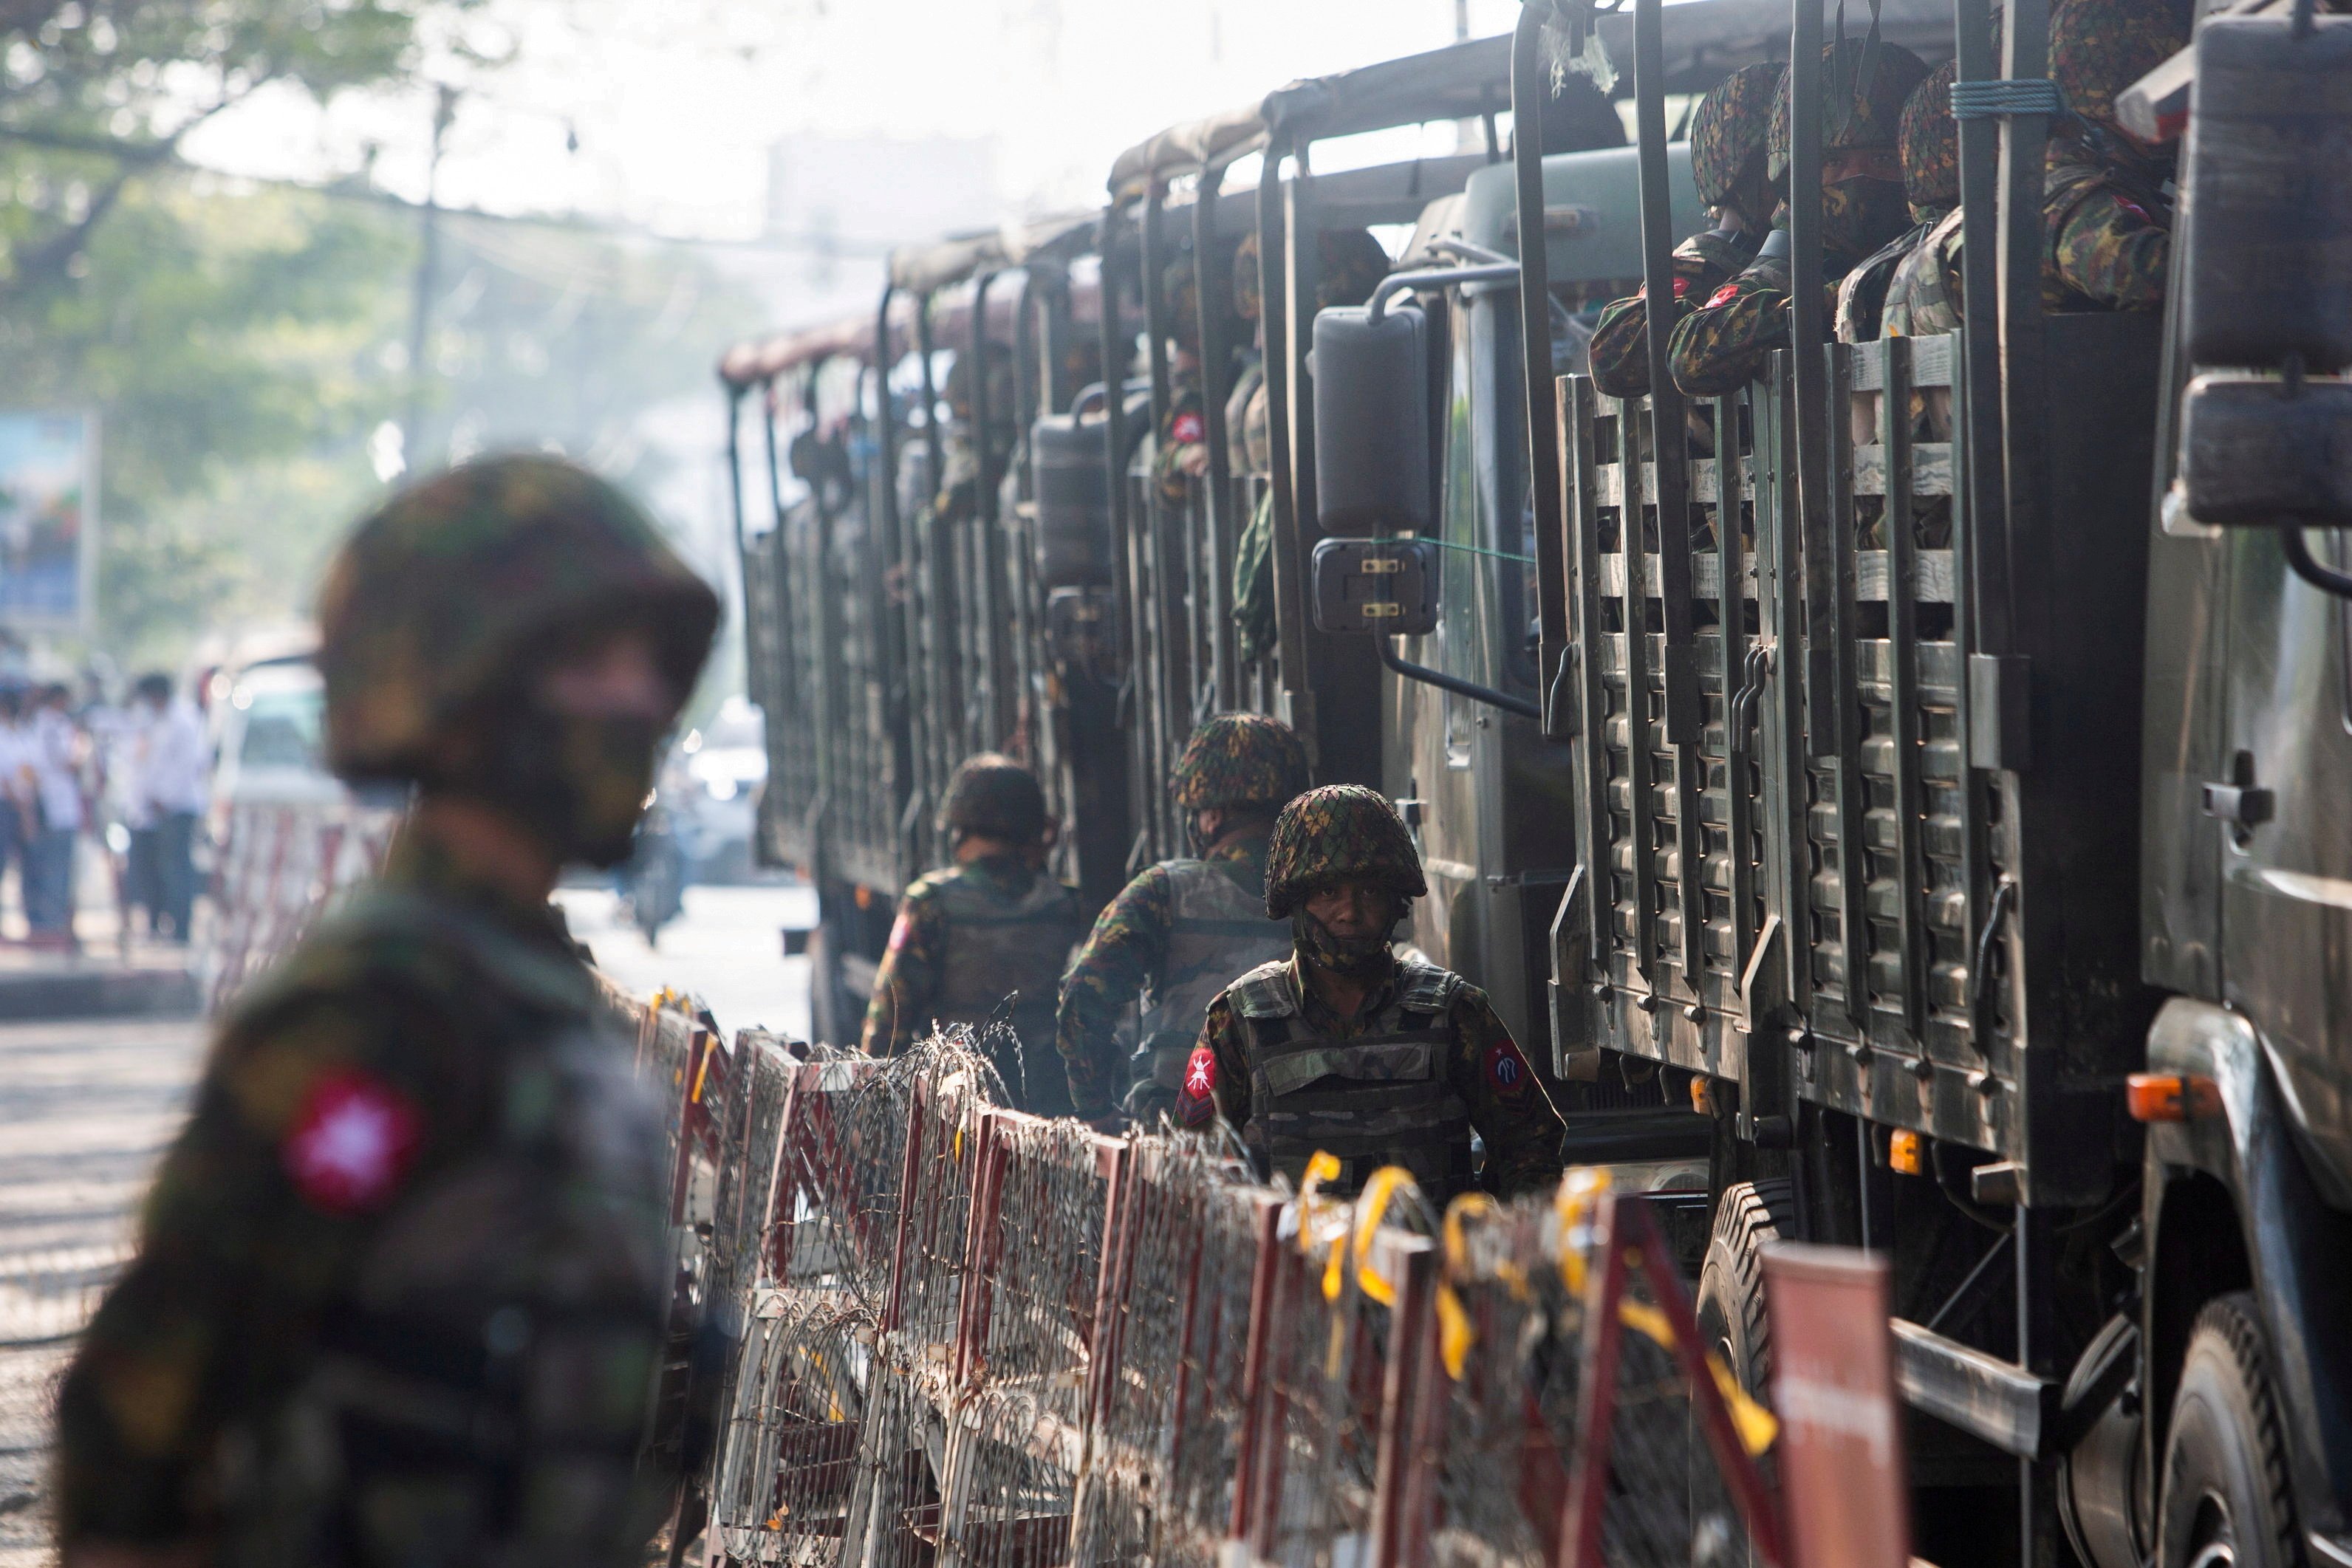 Soldiers stand next to military vehicles as people gather to protest the military coup in Yangon, Myanmar, Feb. 15, 2021. (CNS photo/Reuters)